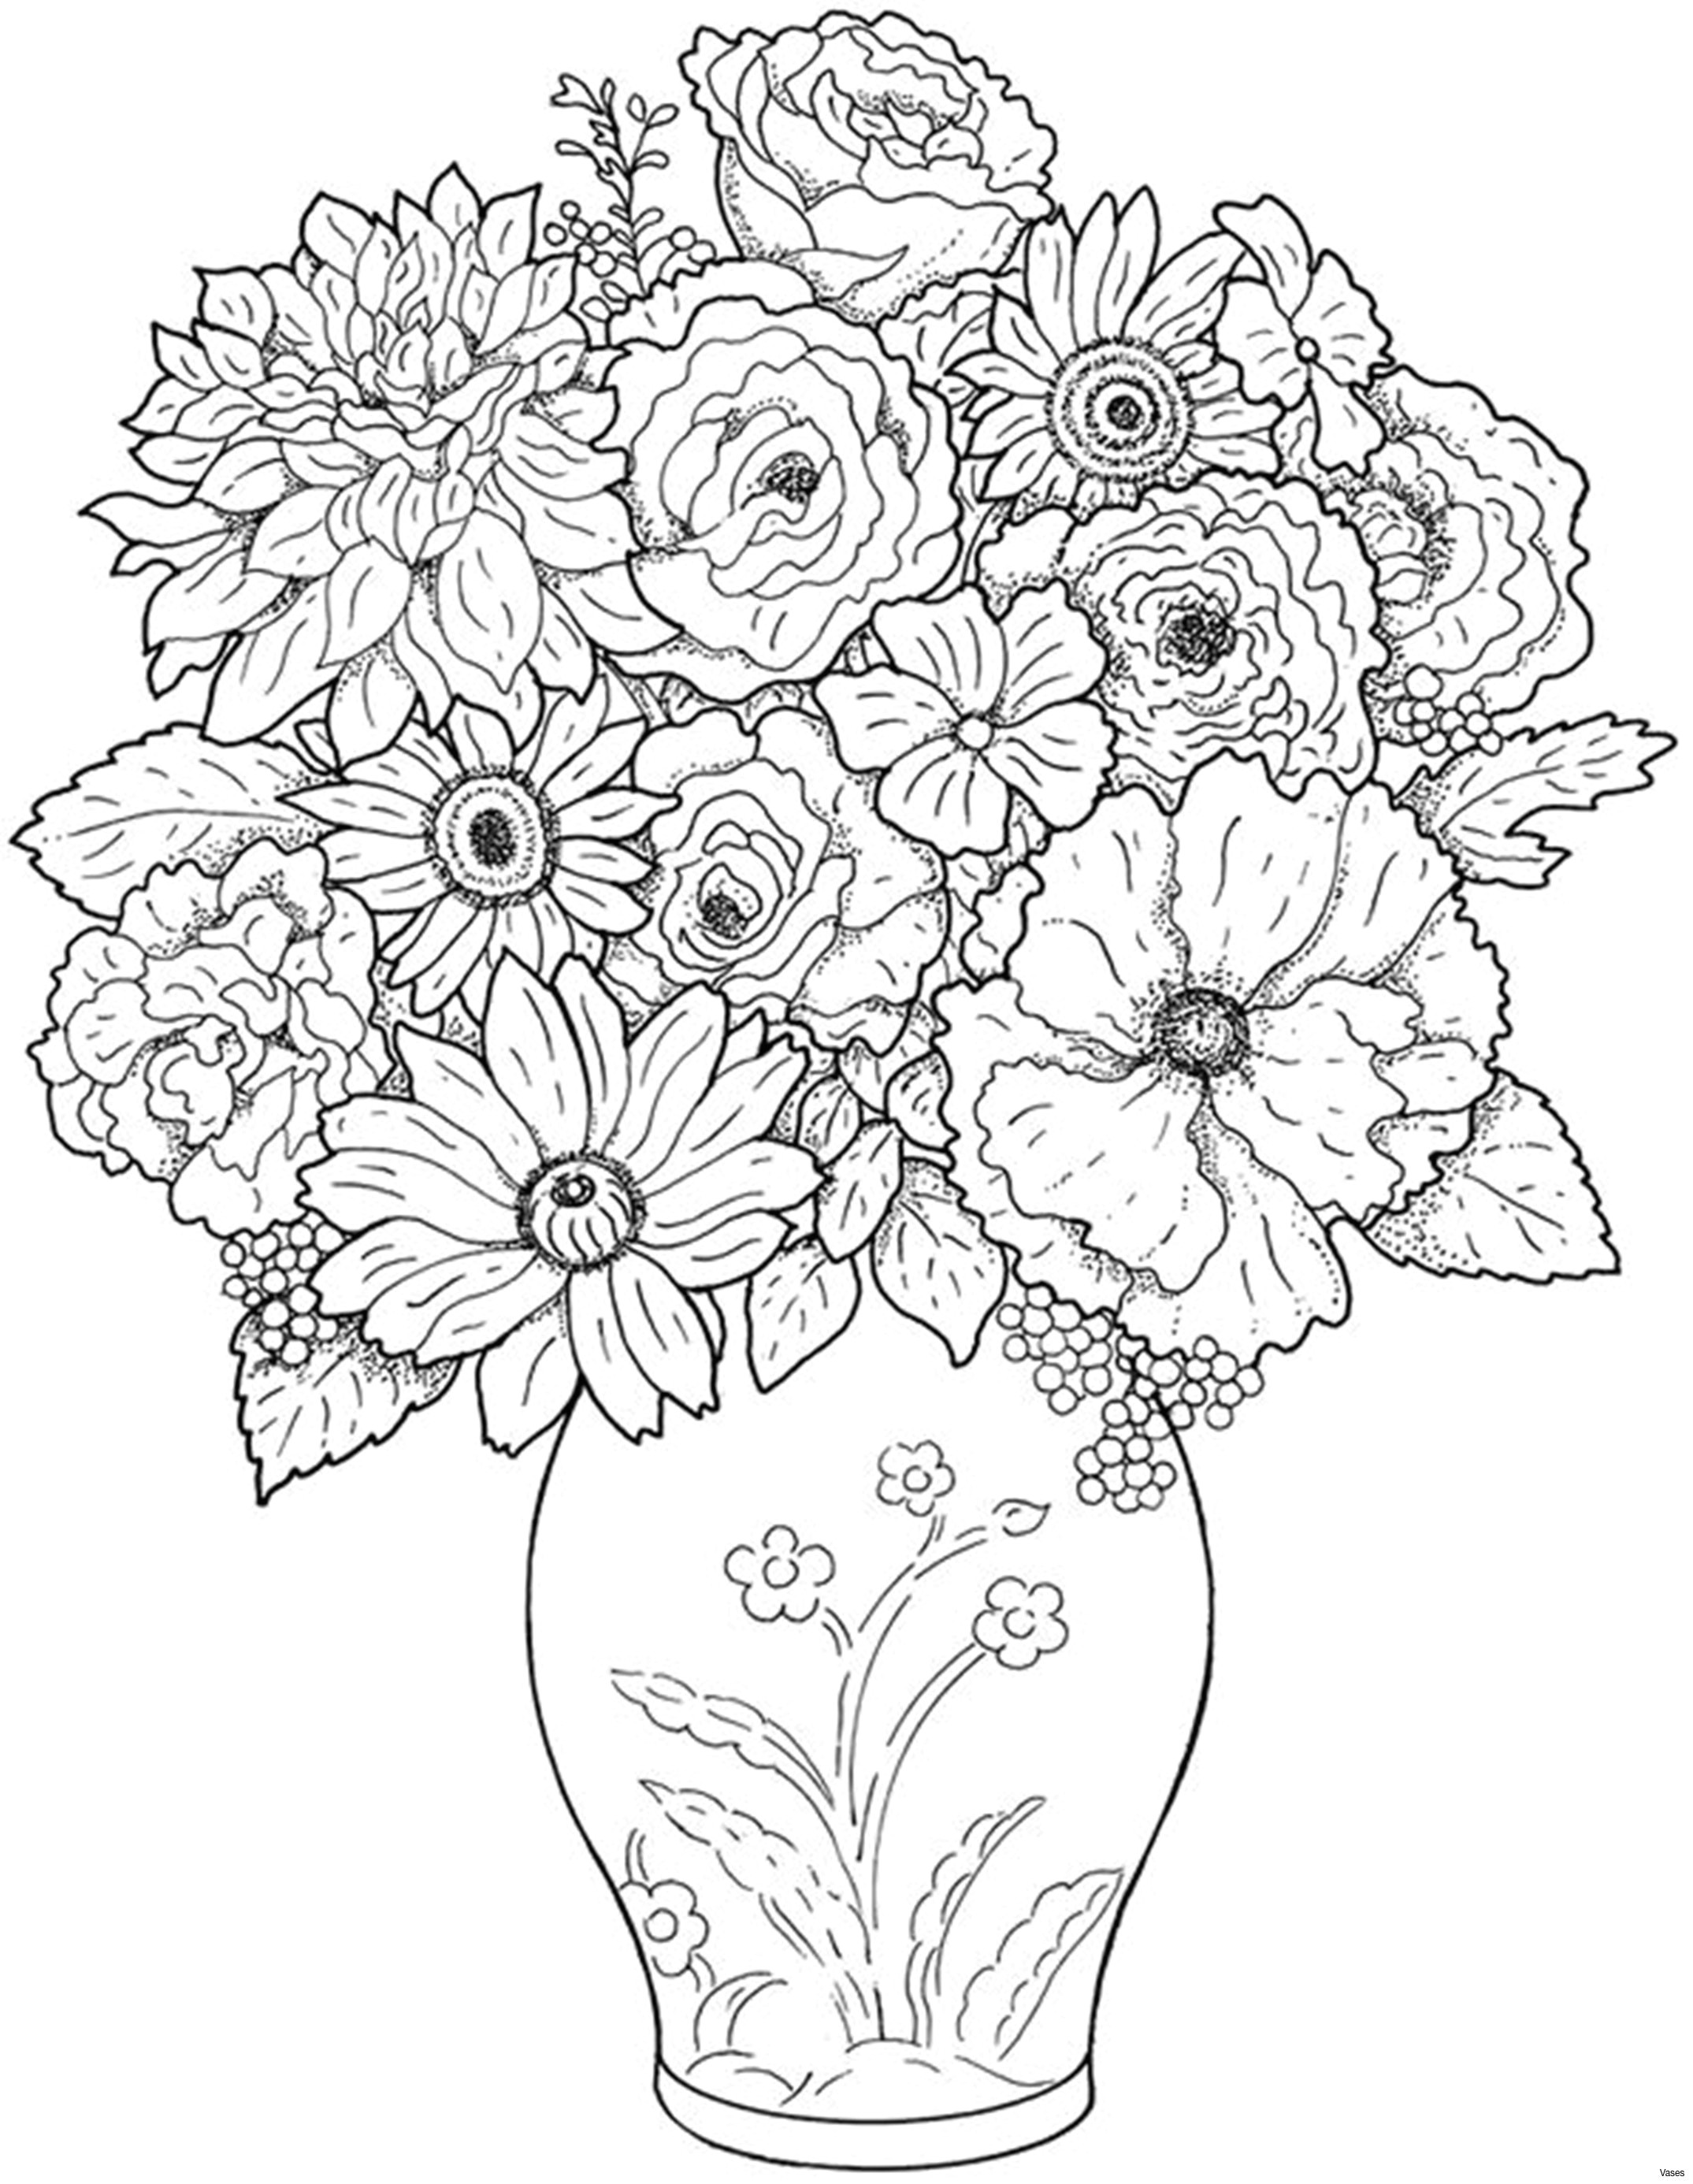 drawn vase pencil drawing 14h vases how to draw sunflowers in a pin sunflower 3i 0d